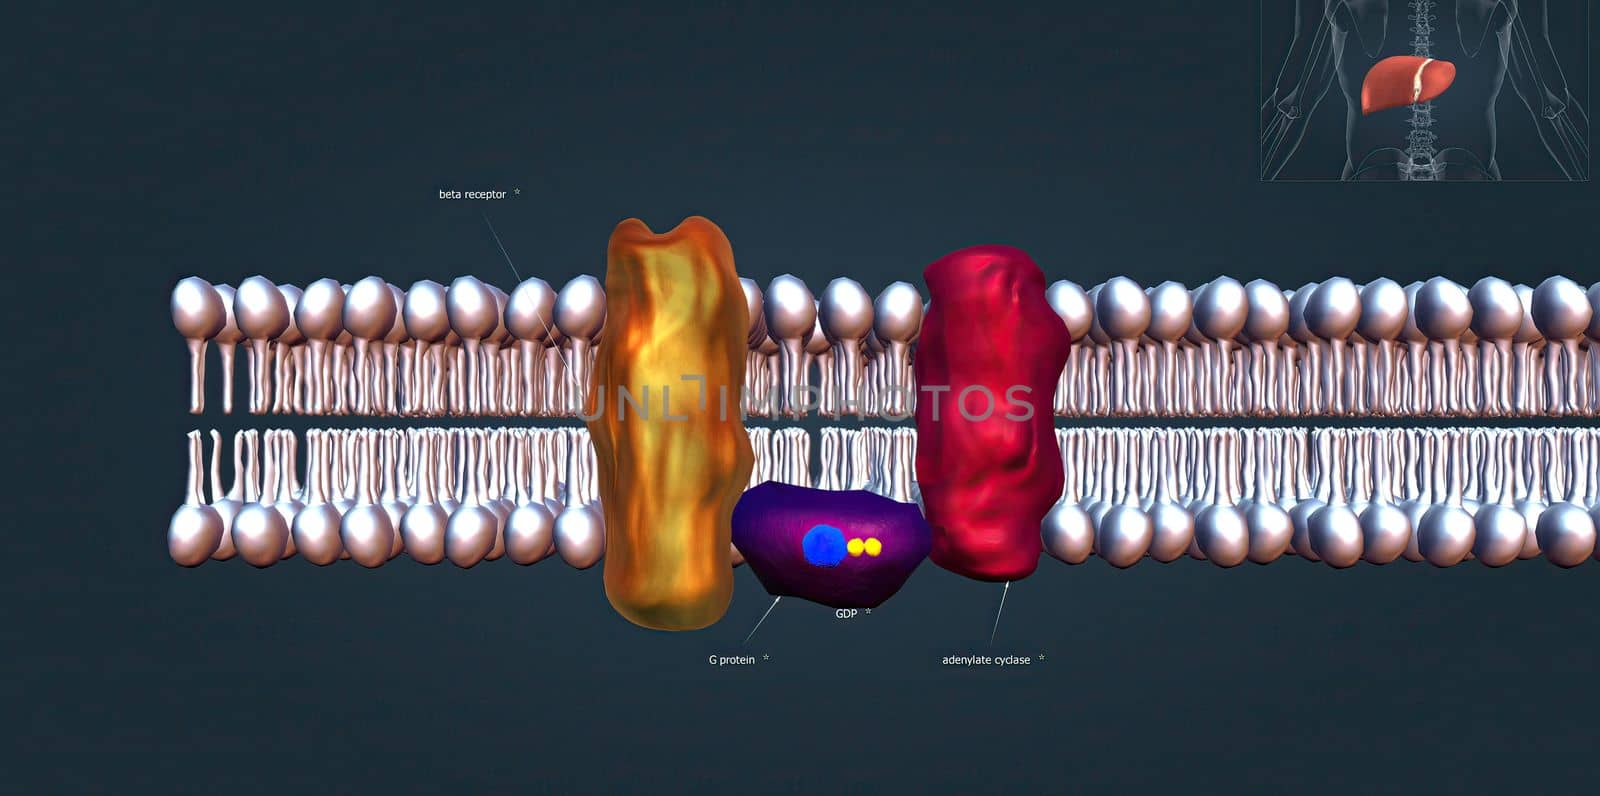 The beta 1 receptor is vital for the normal physiological function of the sympathetic nervous system. 3d illustration